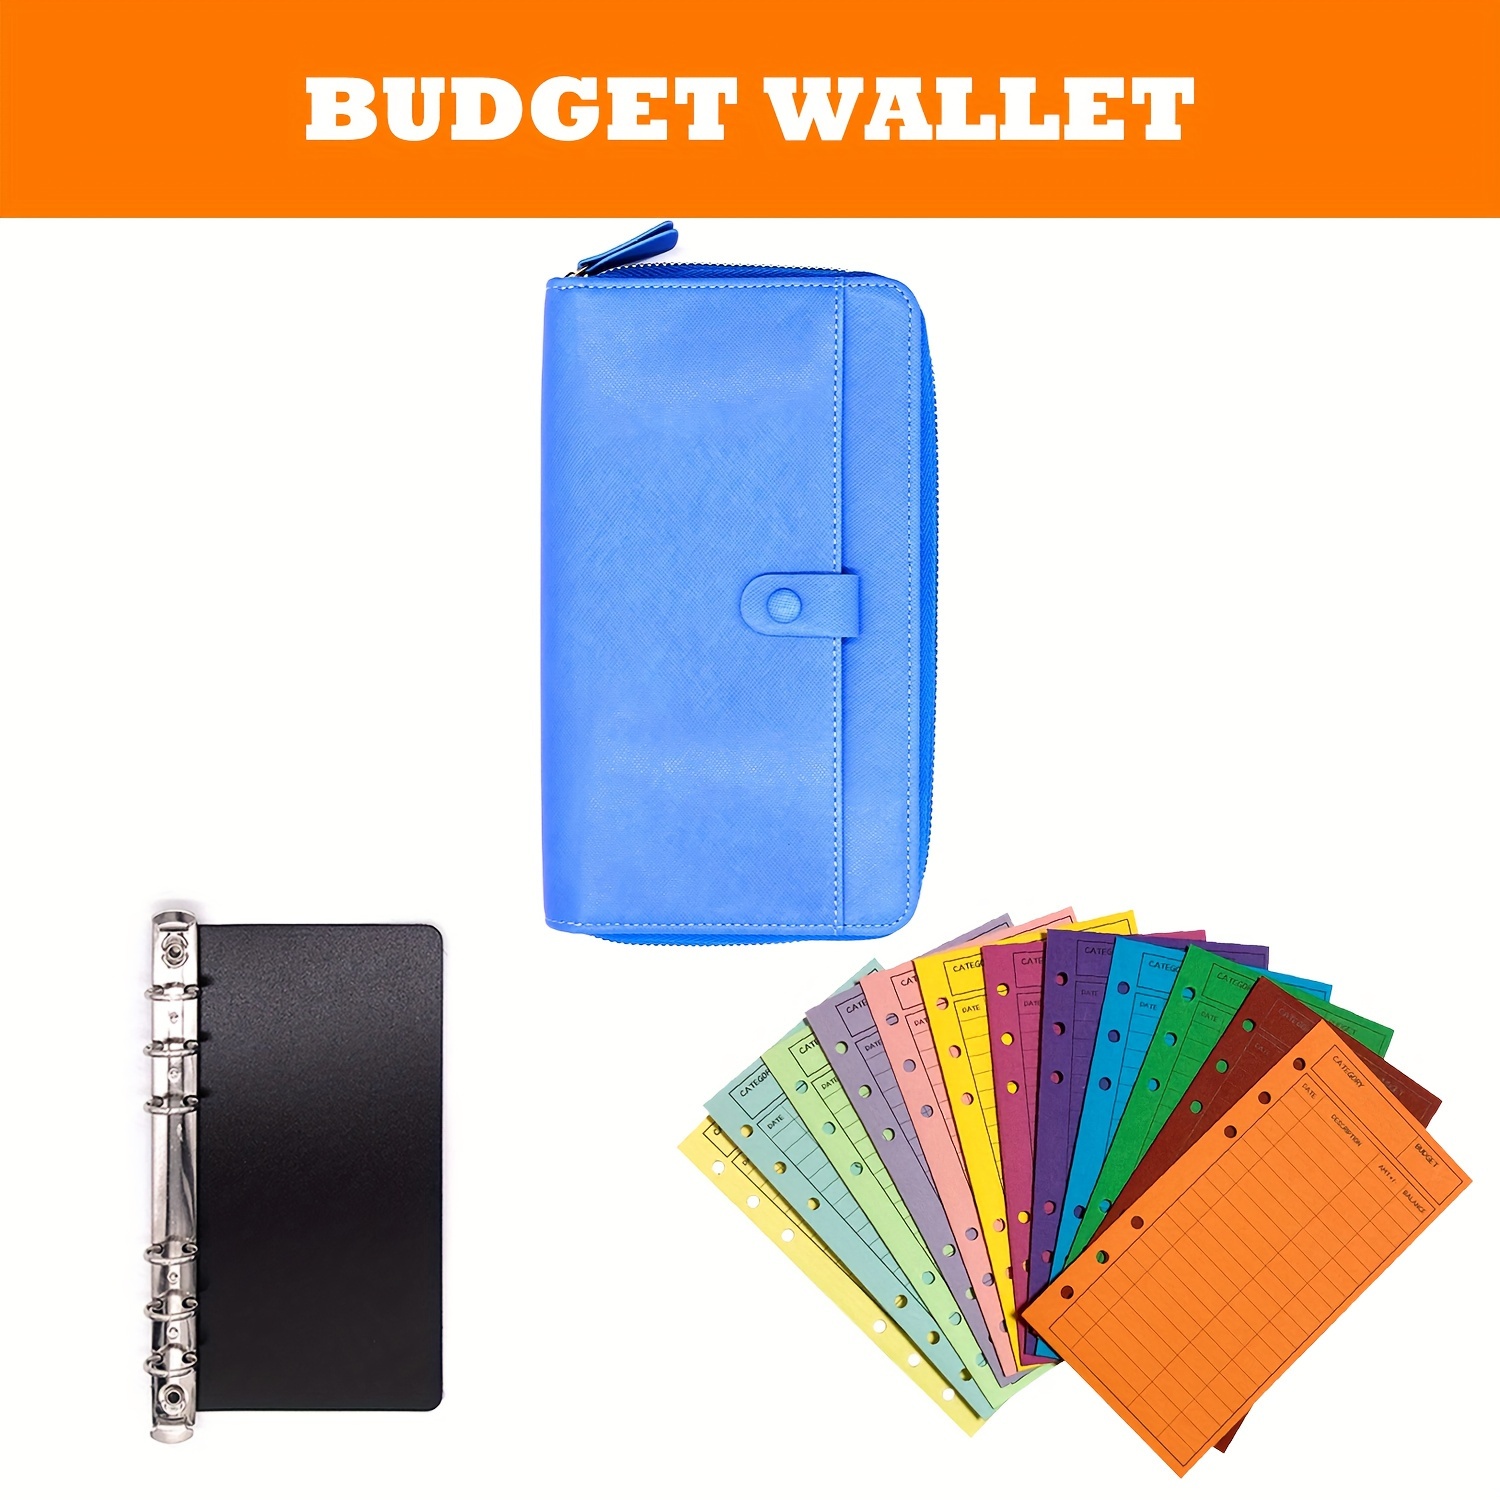 1pc cash envelopes wallet budget wallet rfid blocking finances organizer budget planner with 12 budget envelopes cash envelopes system for budgeting all in one budget system tracking money savings